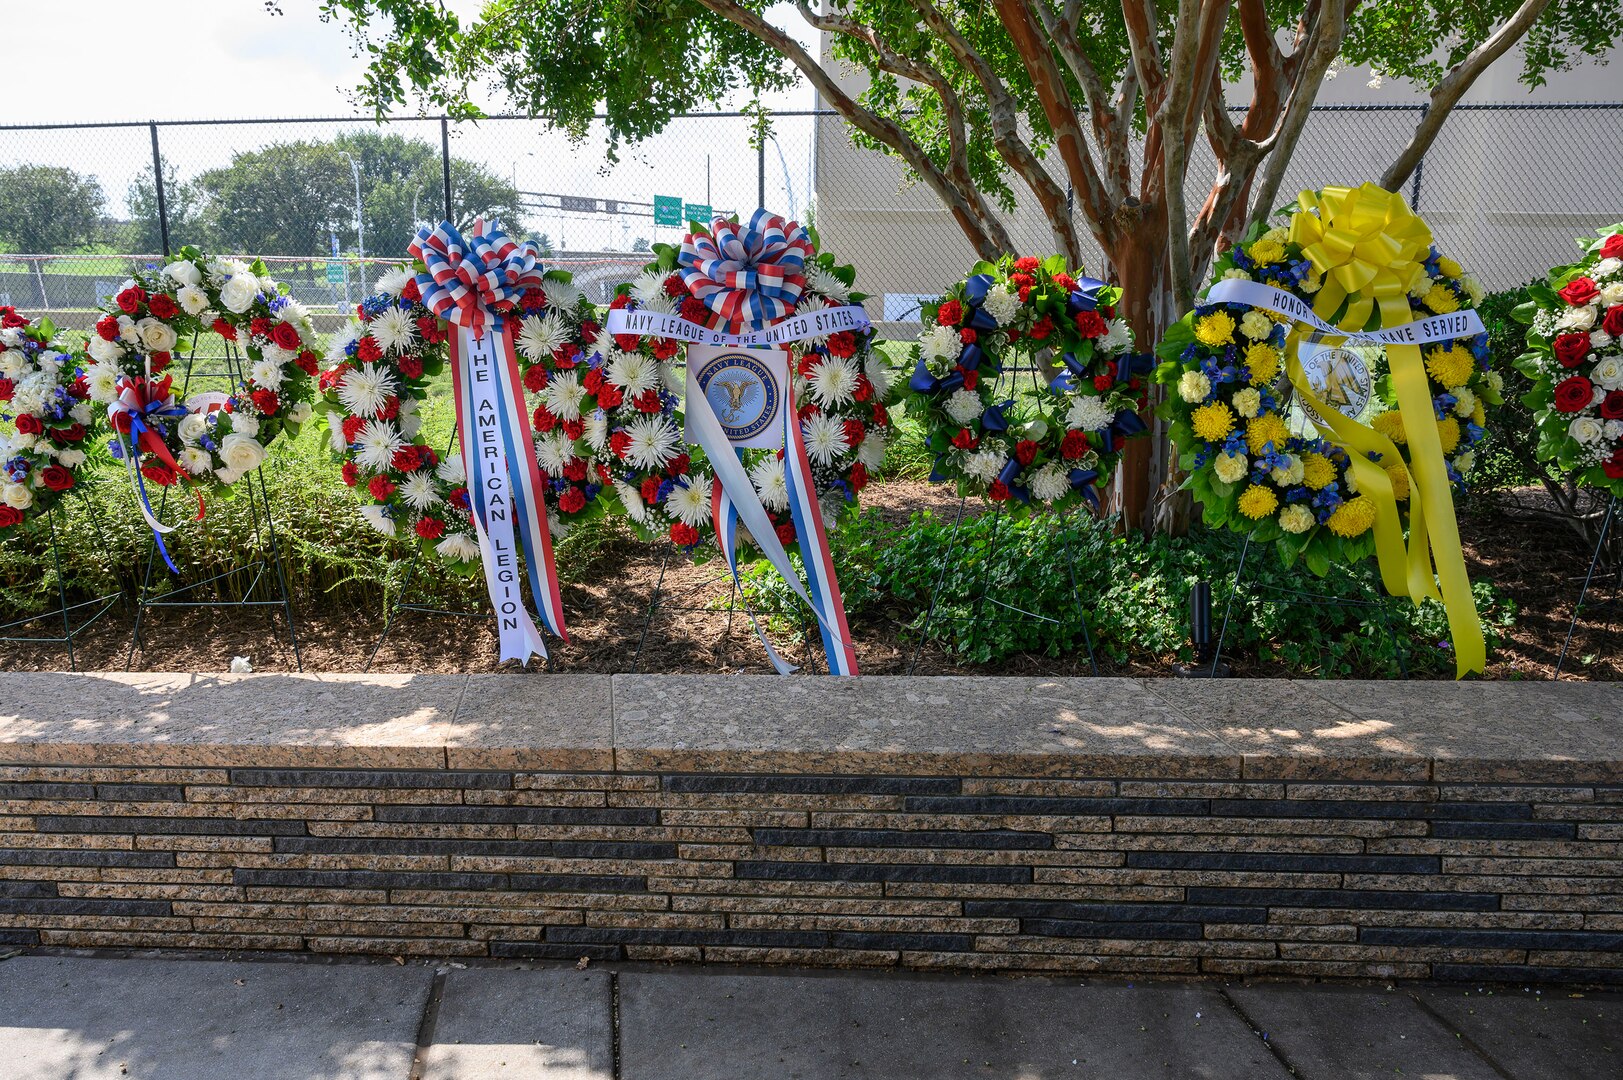 A row of wreaths is displayed in a row outside.